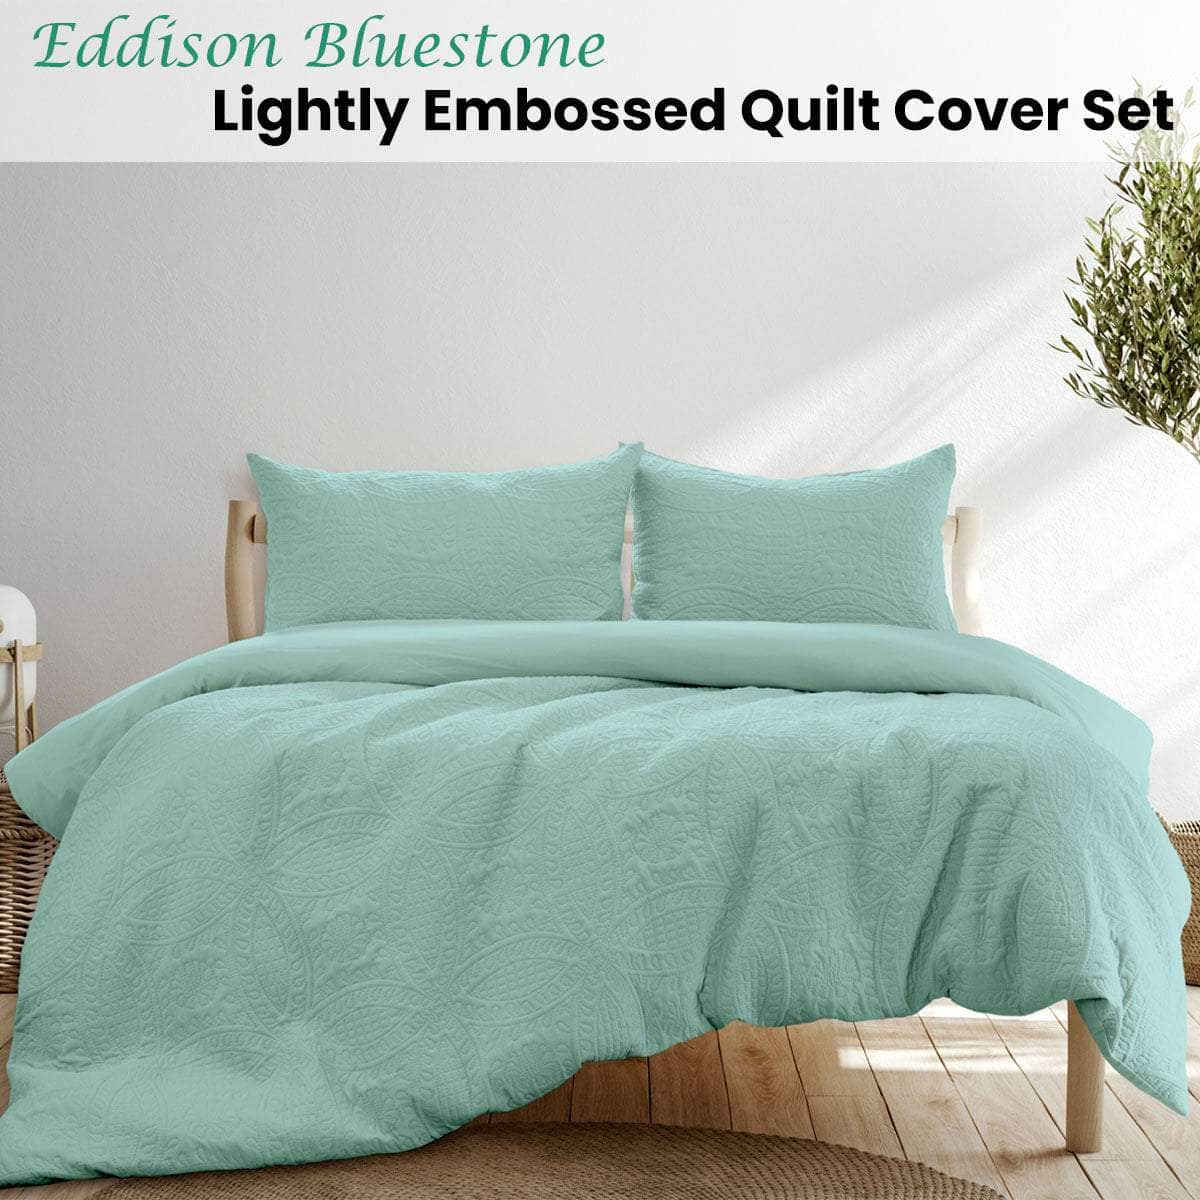 Bluestone Light Quilted Embossed Quilt Cover Set King